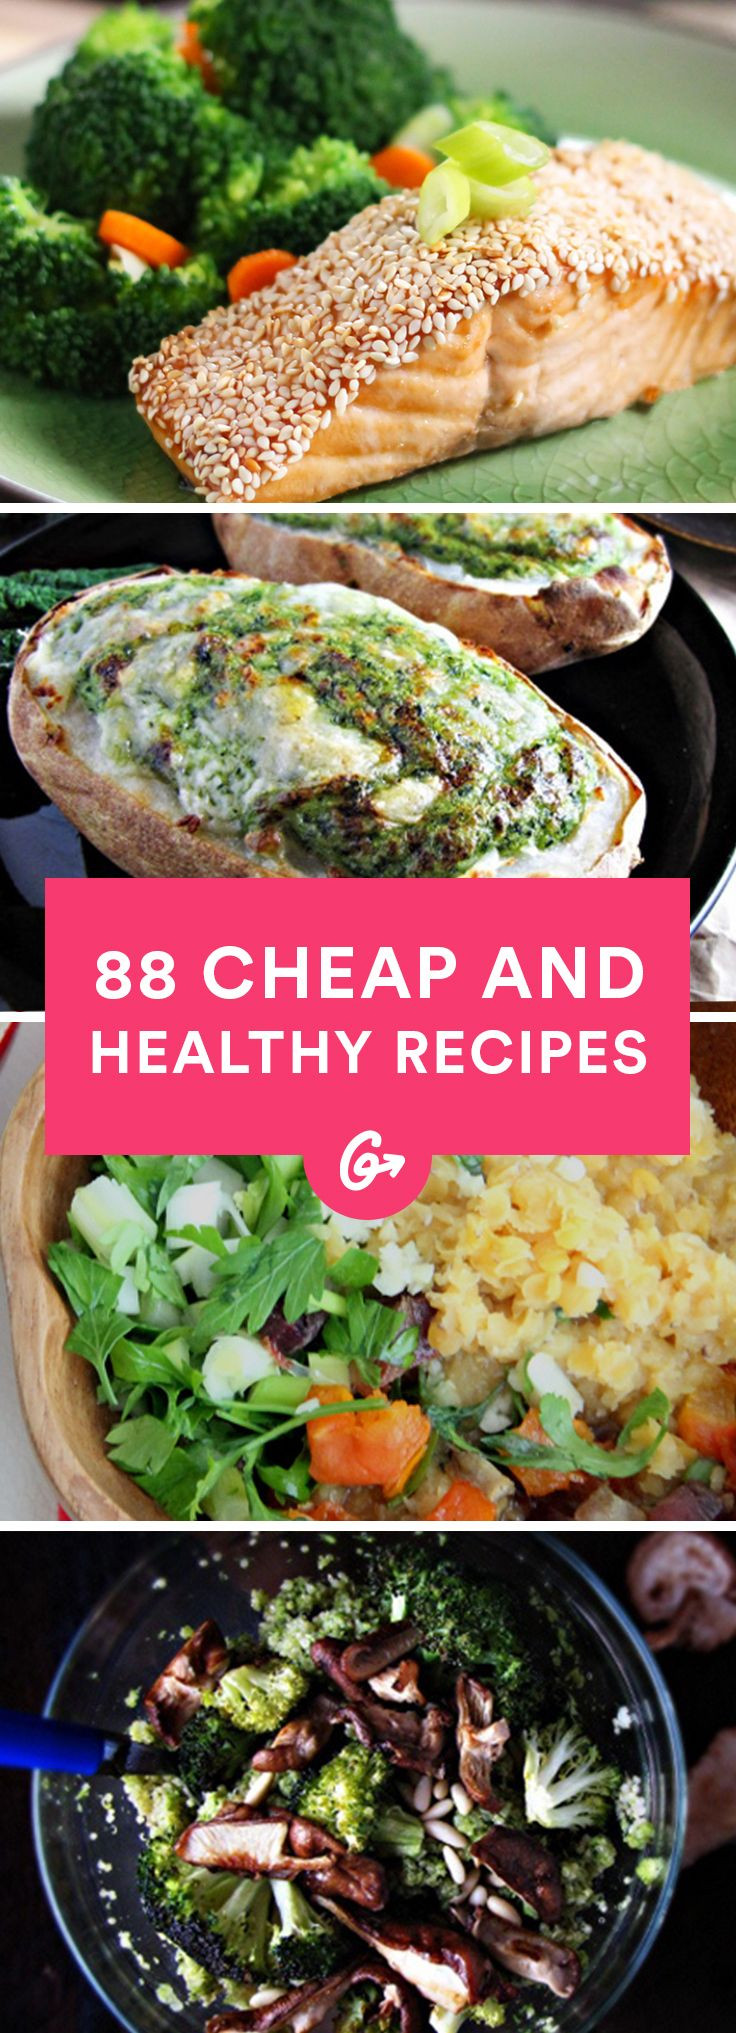 Healthy Affordable Dinners
 The 25 best Entree recipes ideas on Pinterest